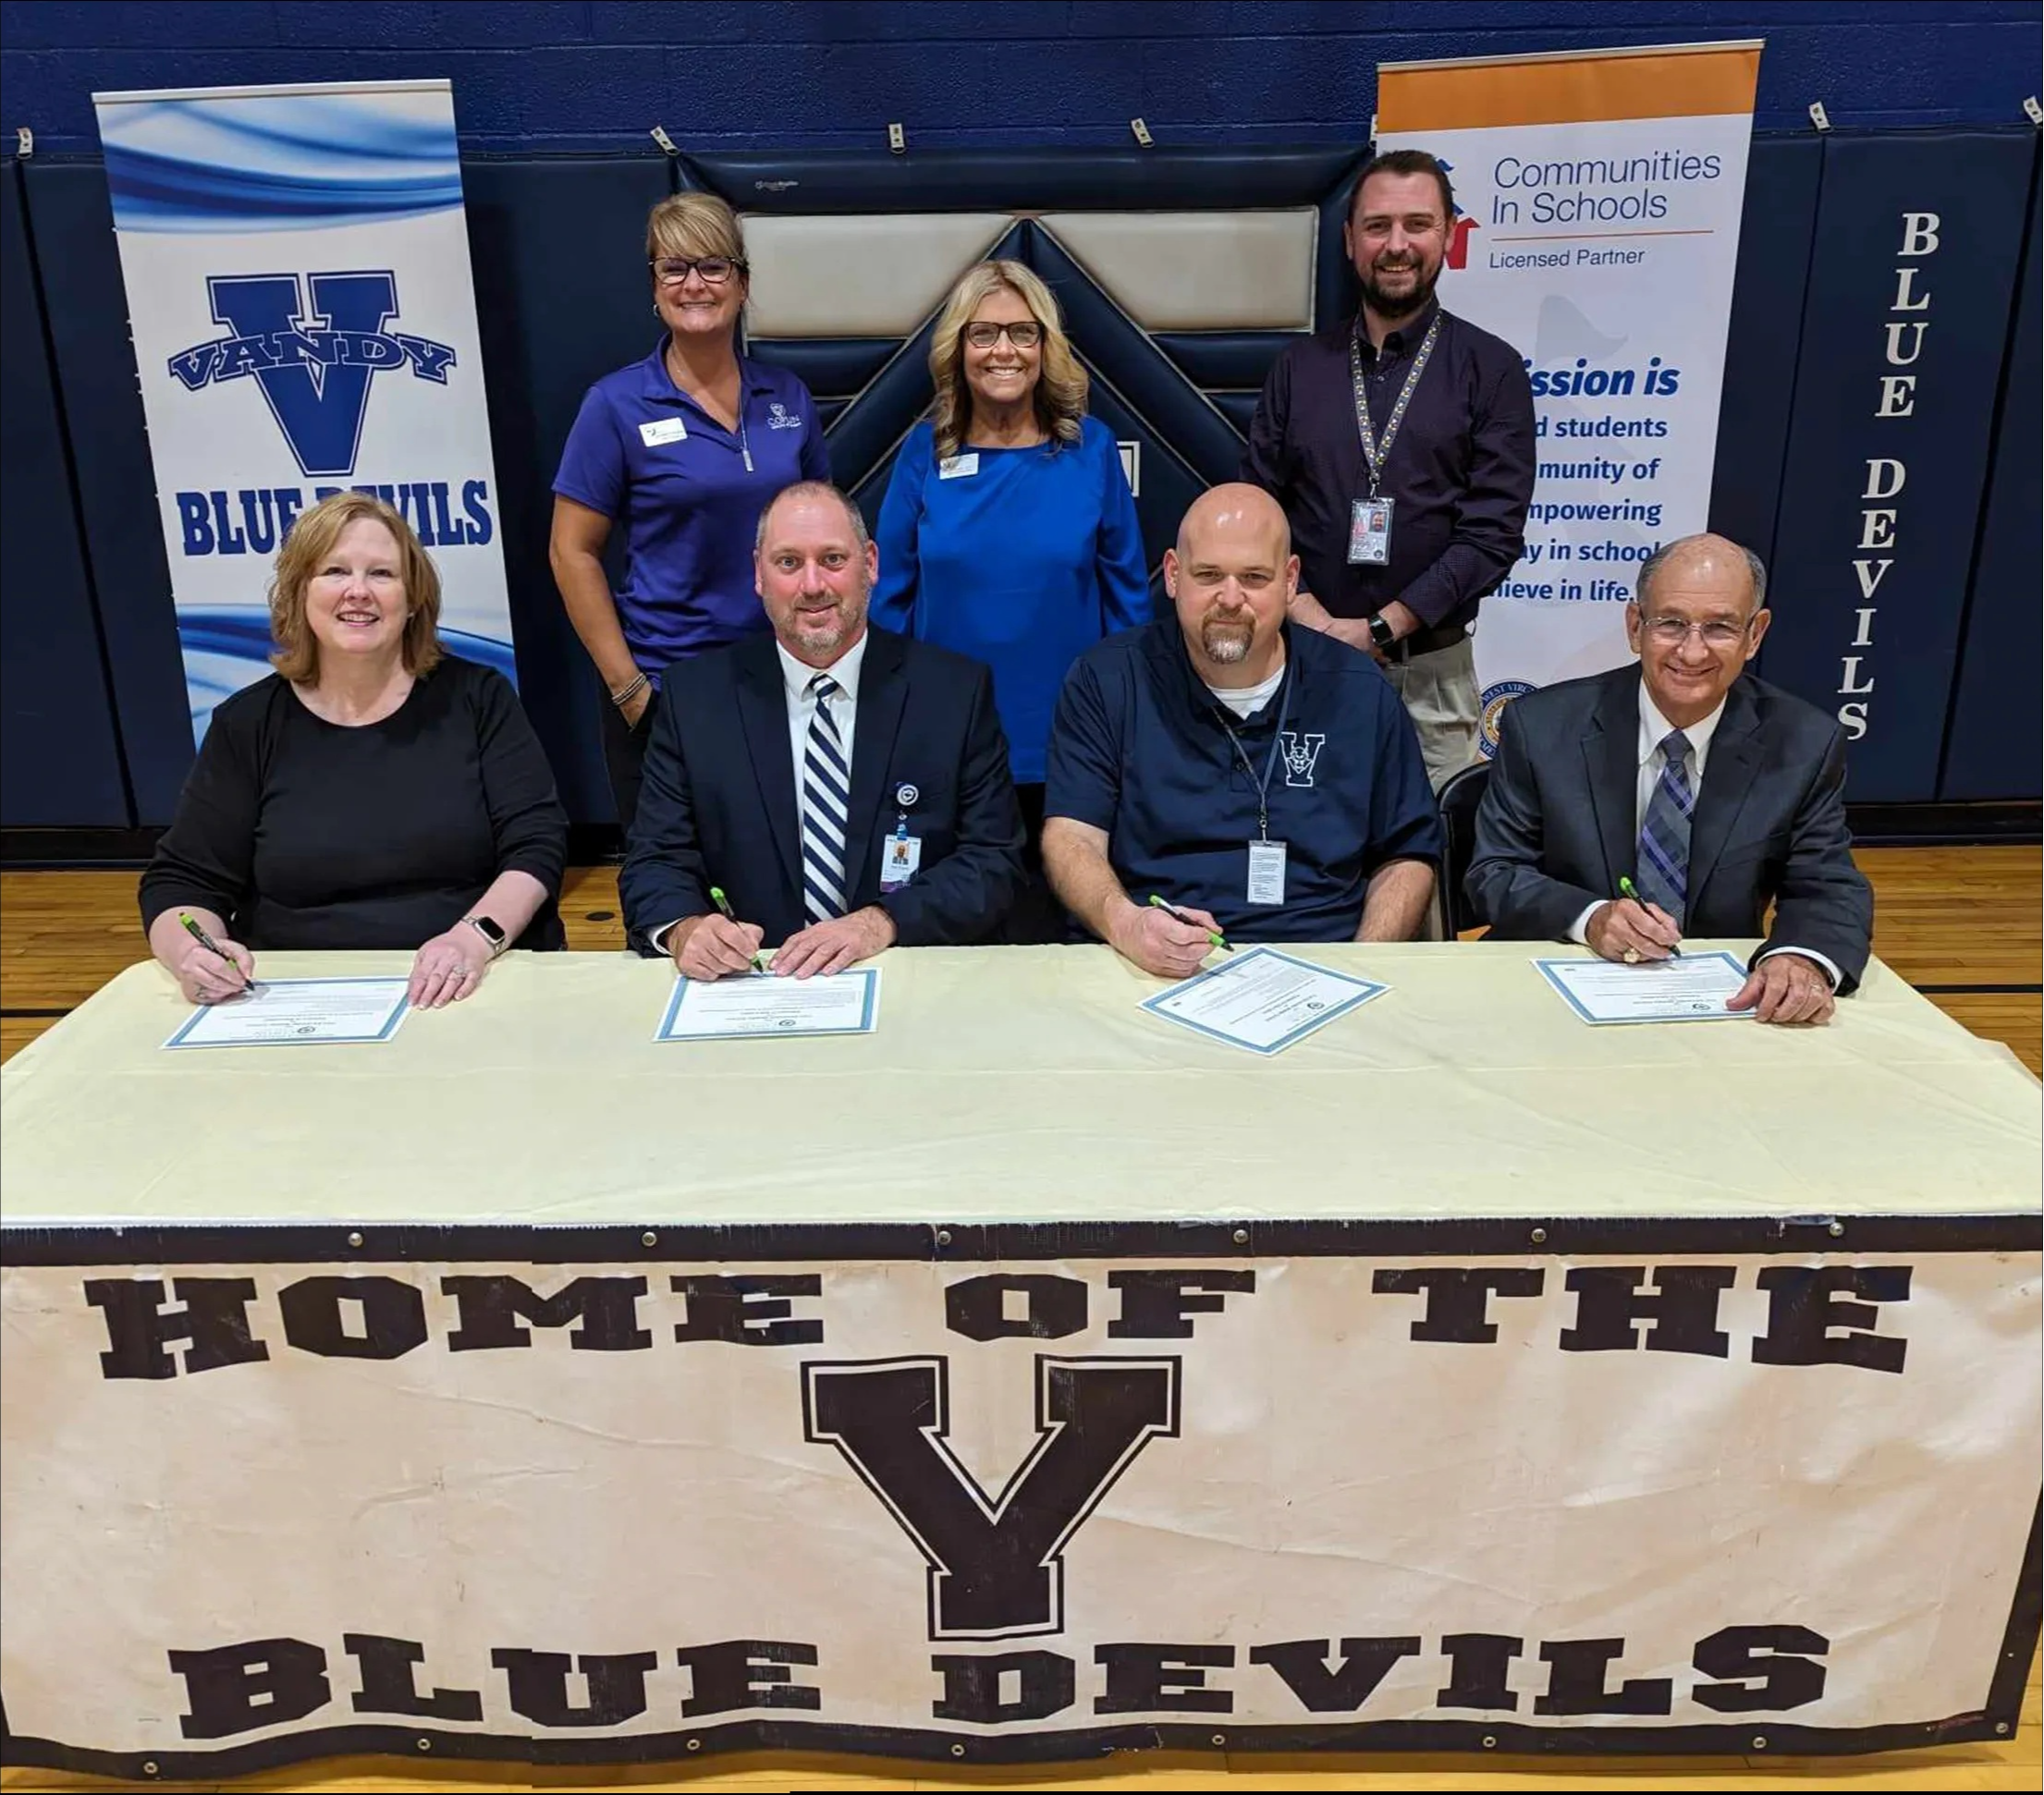 members of the new education - business partnership sitting at a table and standing in a row behind inside a school gymnasium